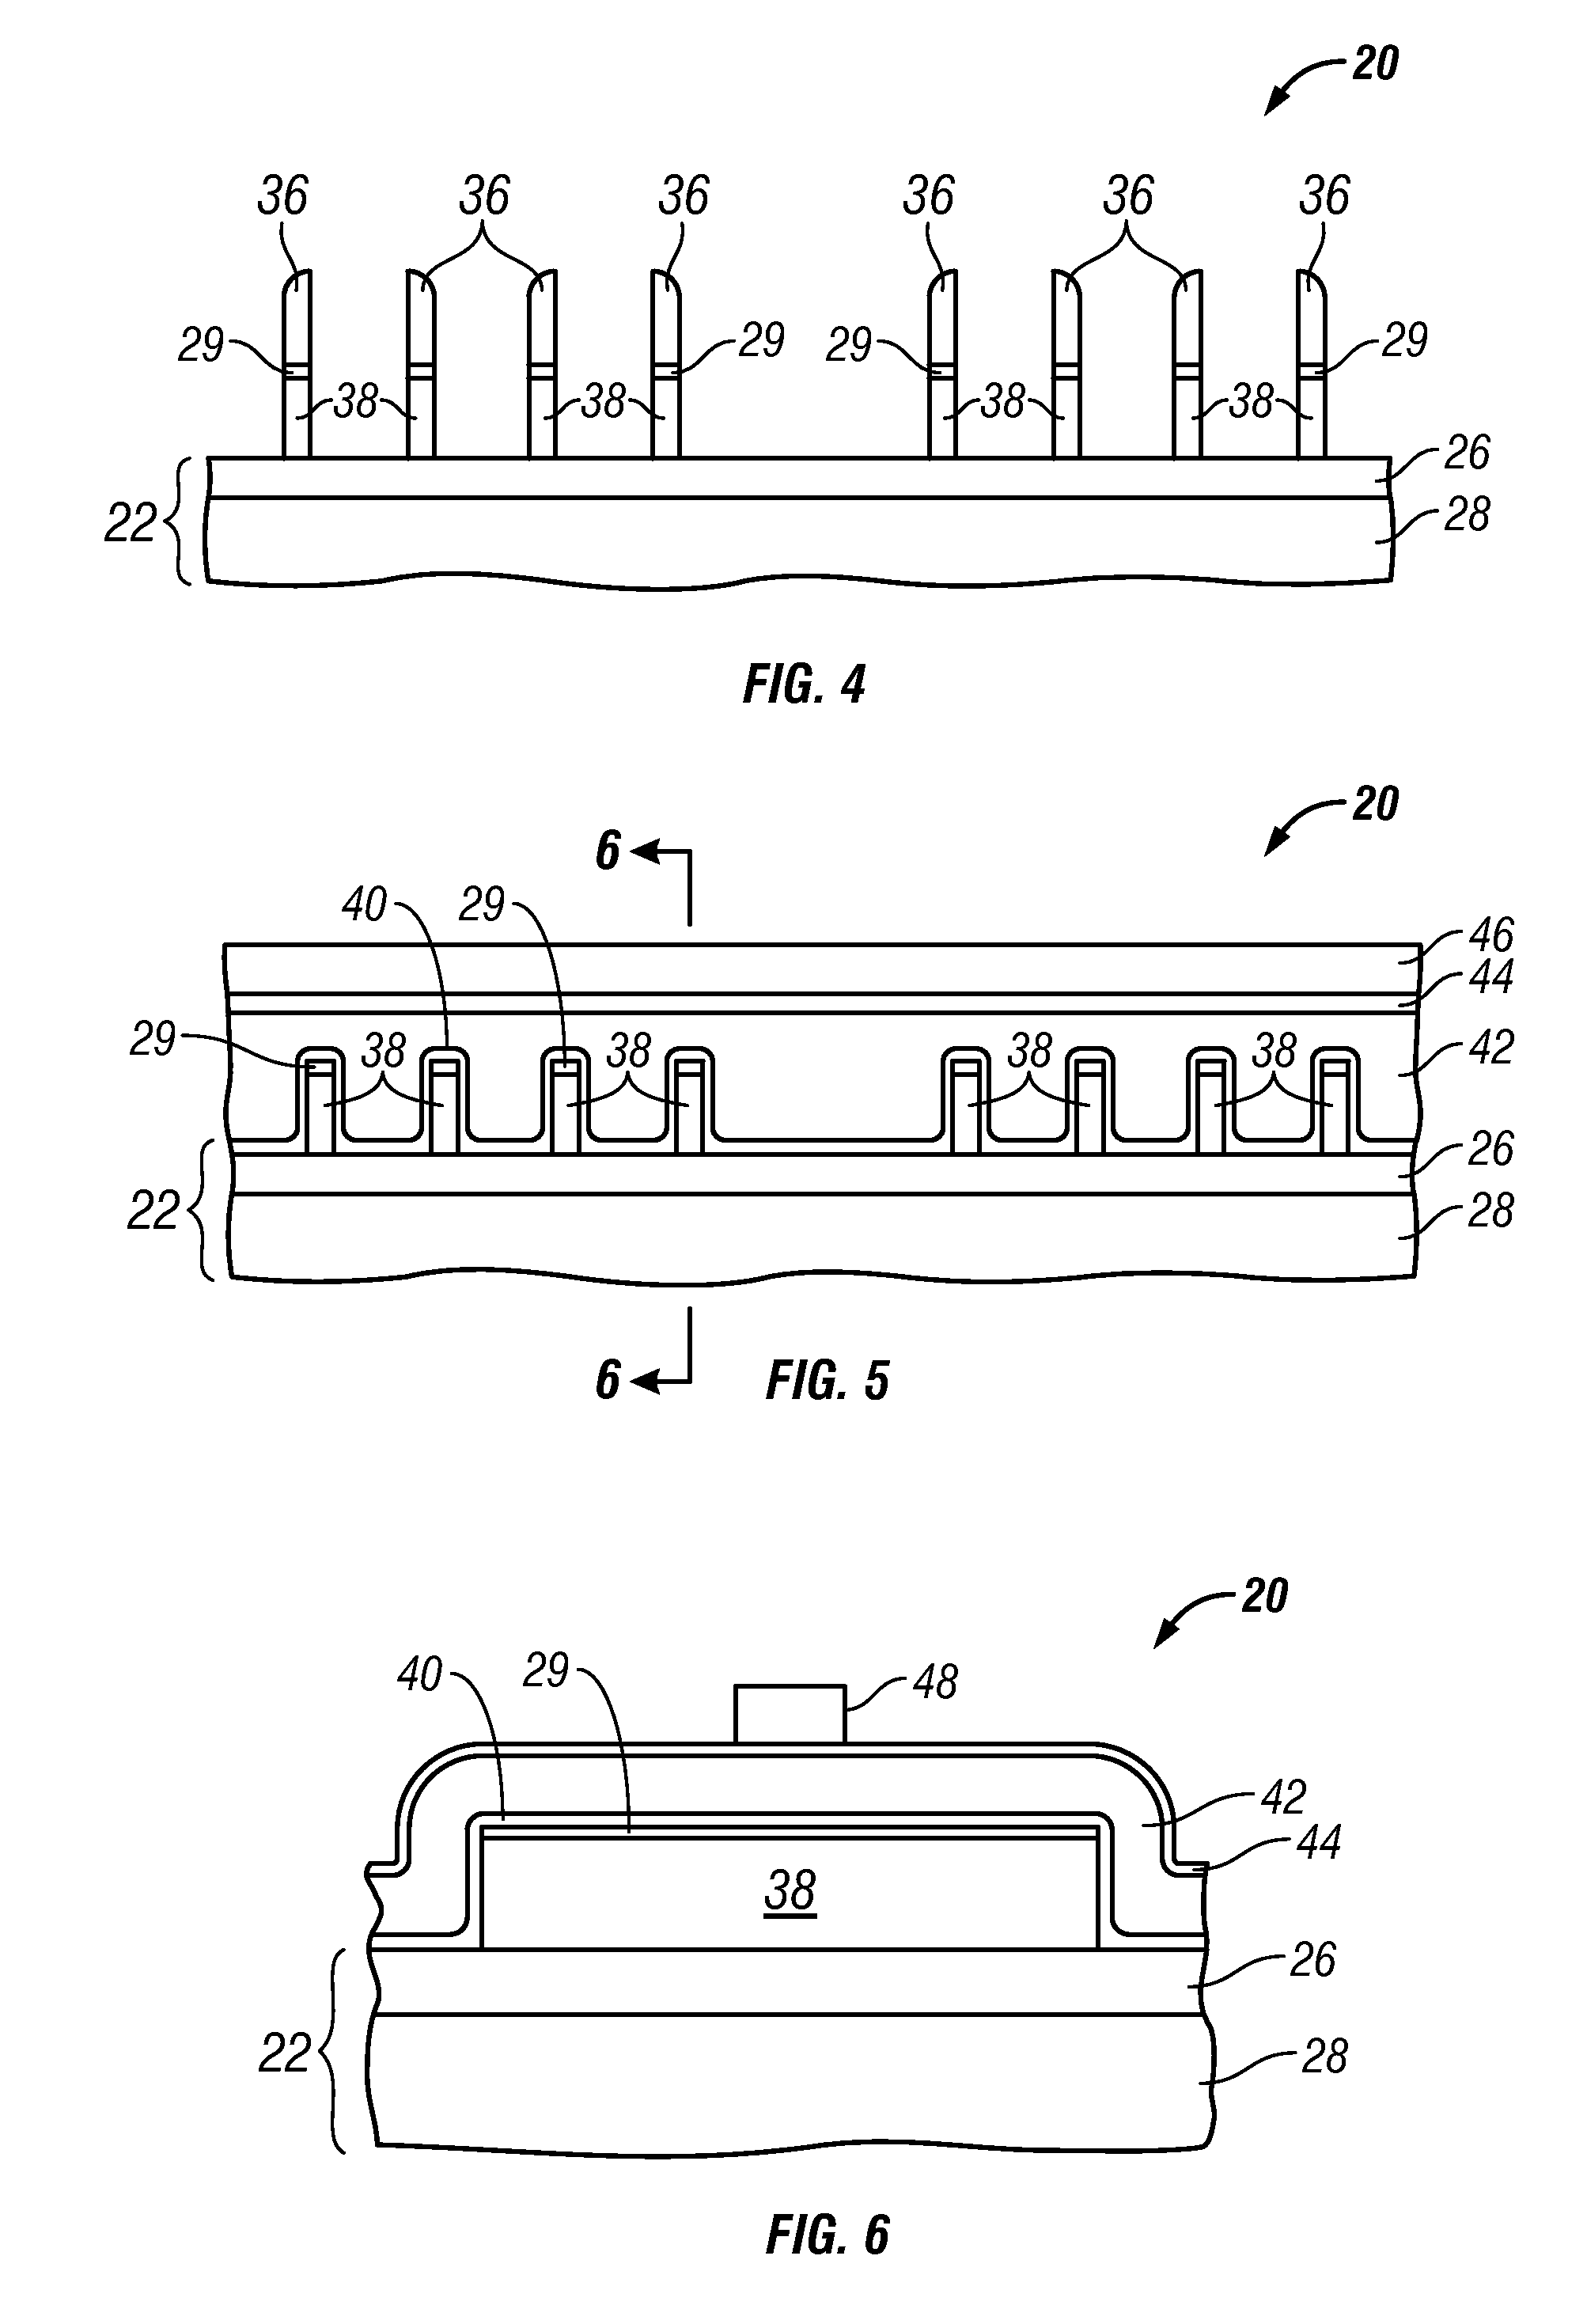 Methods for fabricating non-planar electronic devices having sidewall spacers formed adjacent selected surfaces